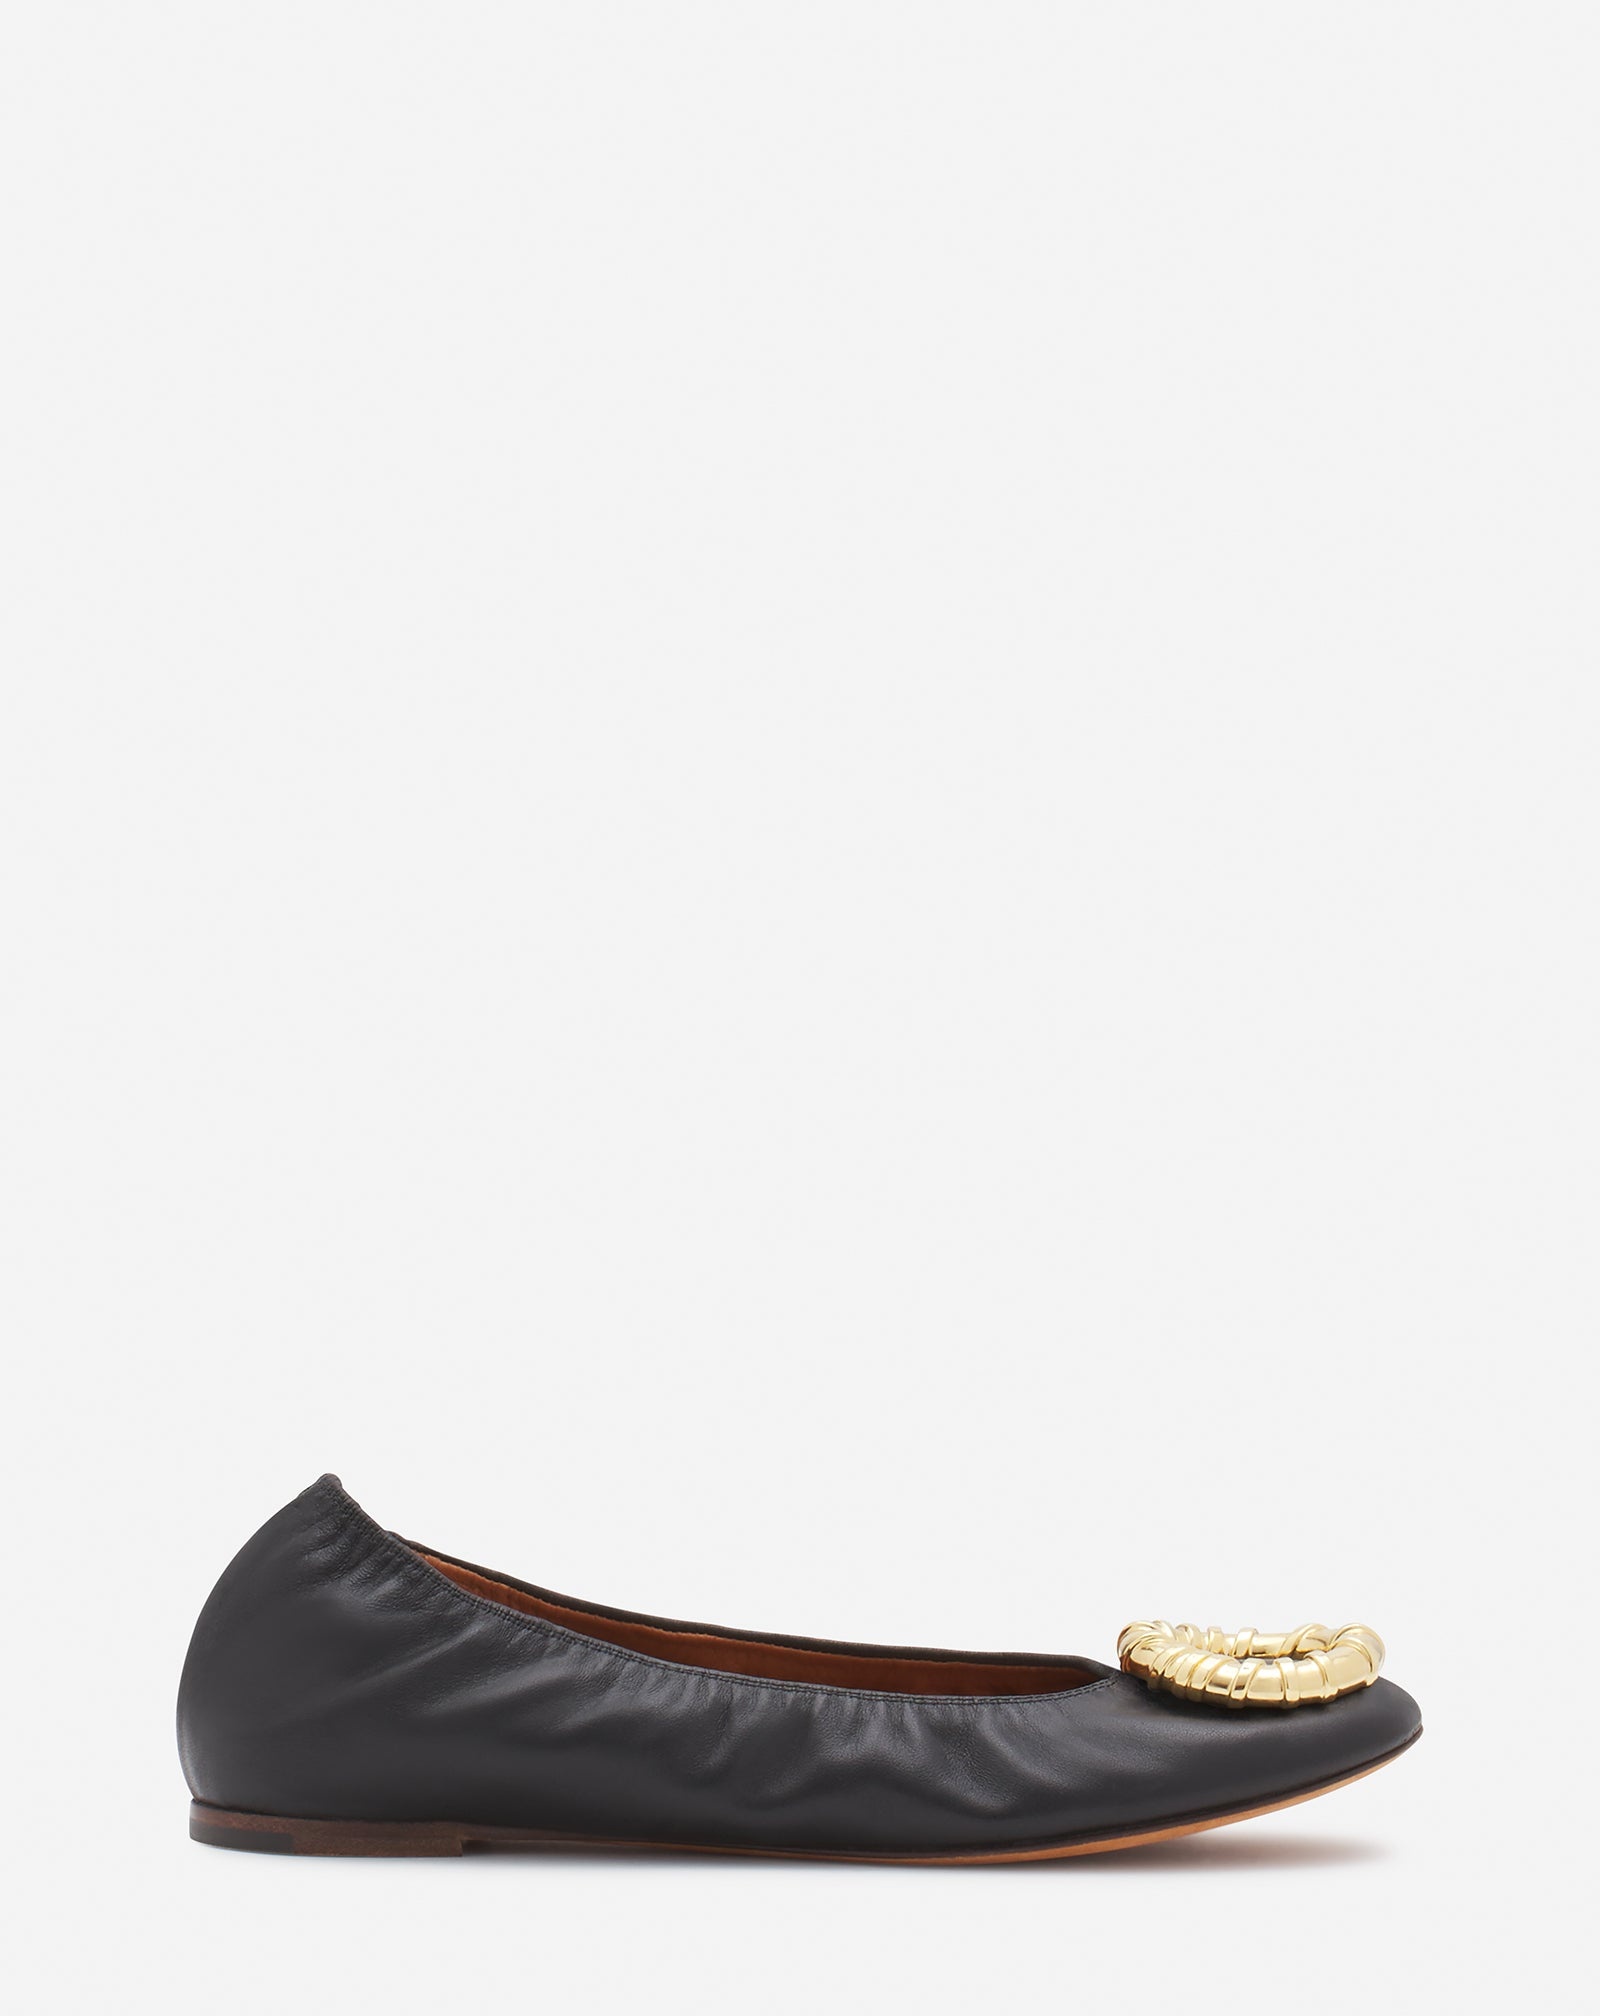 MELODIE LEATHER BALLERINA FLAT - 1